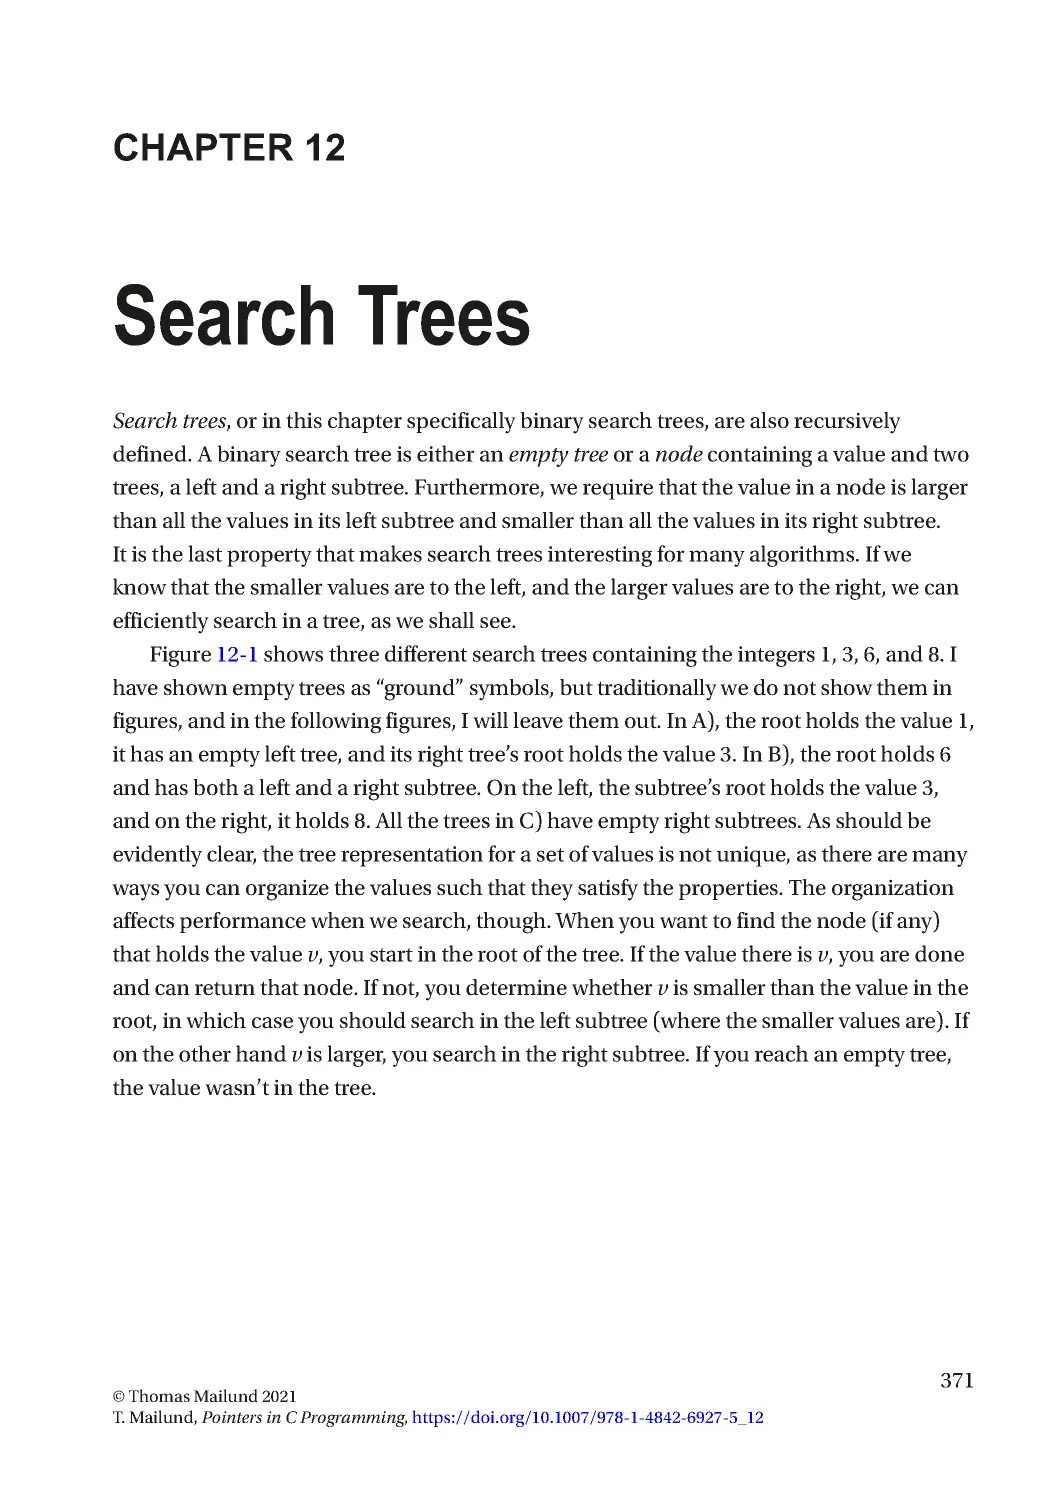 Chapter 12: Search Trees